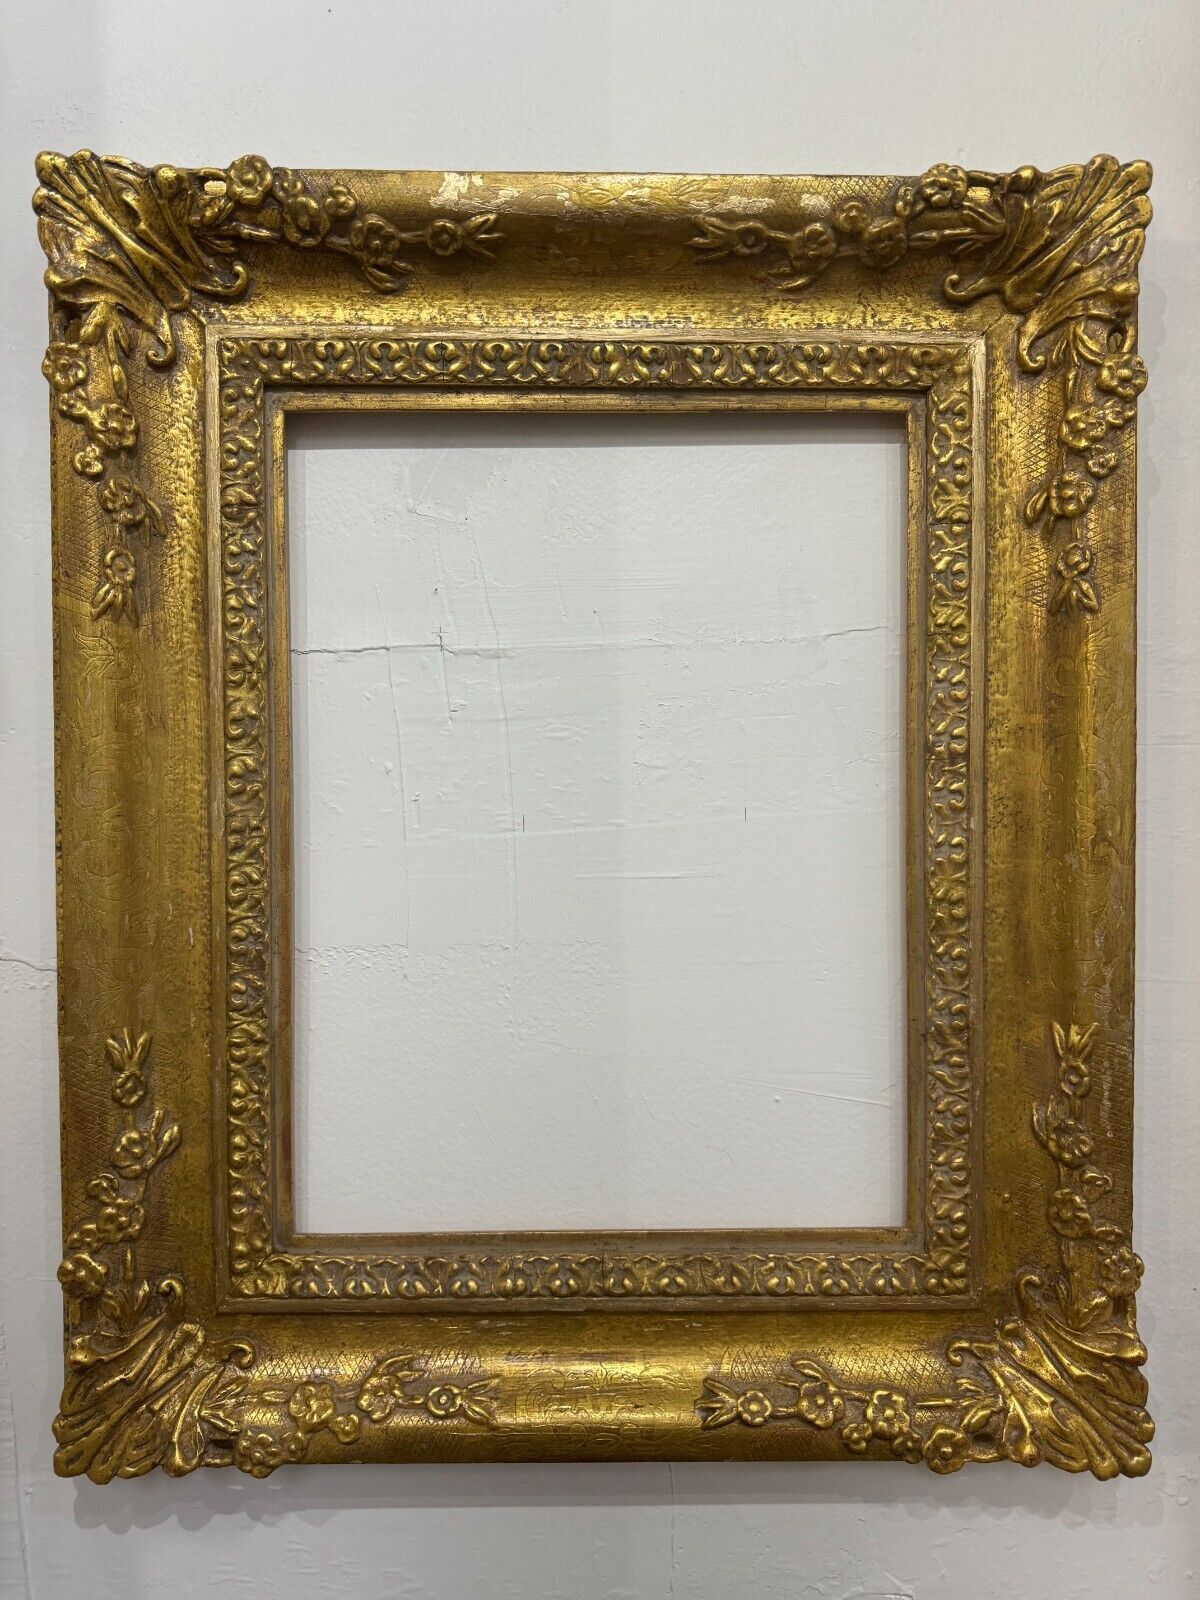 Real Gold Gilted Frame antique old aged vintage baroque ornate 13.75 x 18 inches